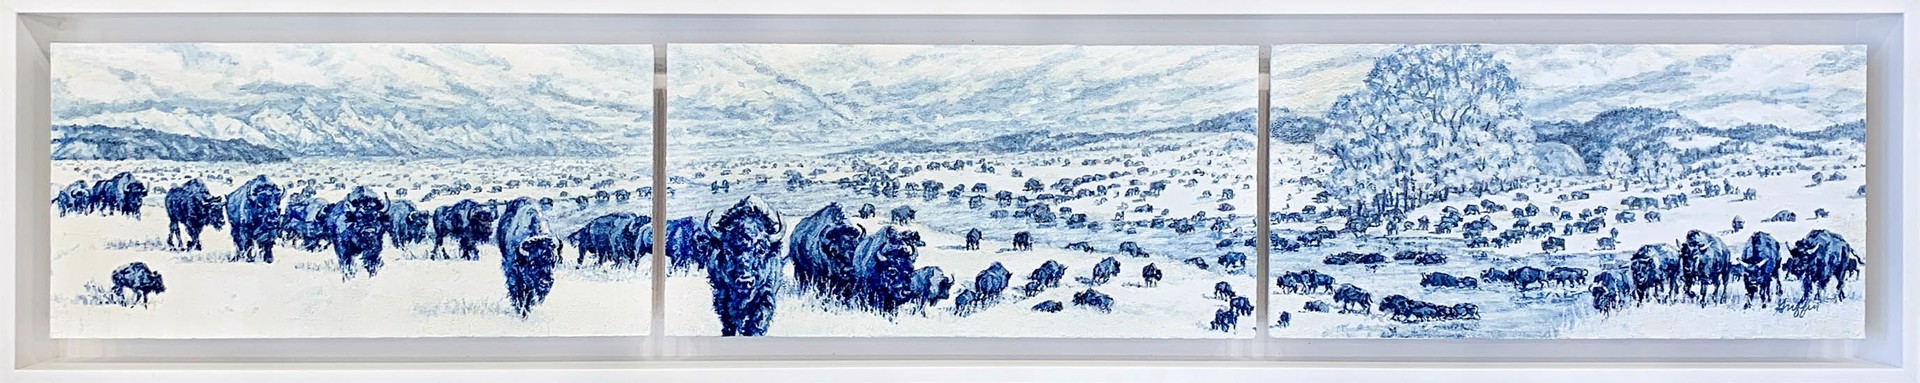 Original Oil Painting By Patricia Griffin Featuring A Herd Of Bison Across A Mountain Landscape In Blue Monochrome Color Palette